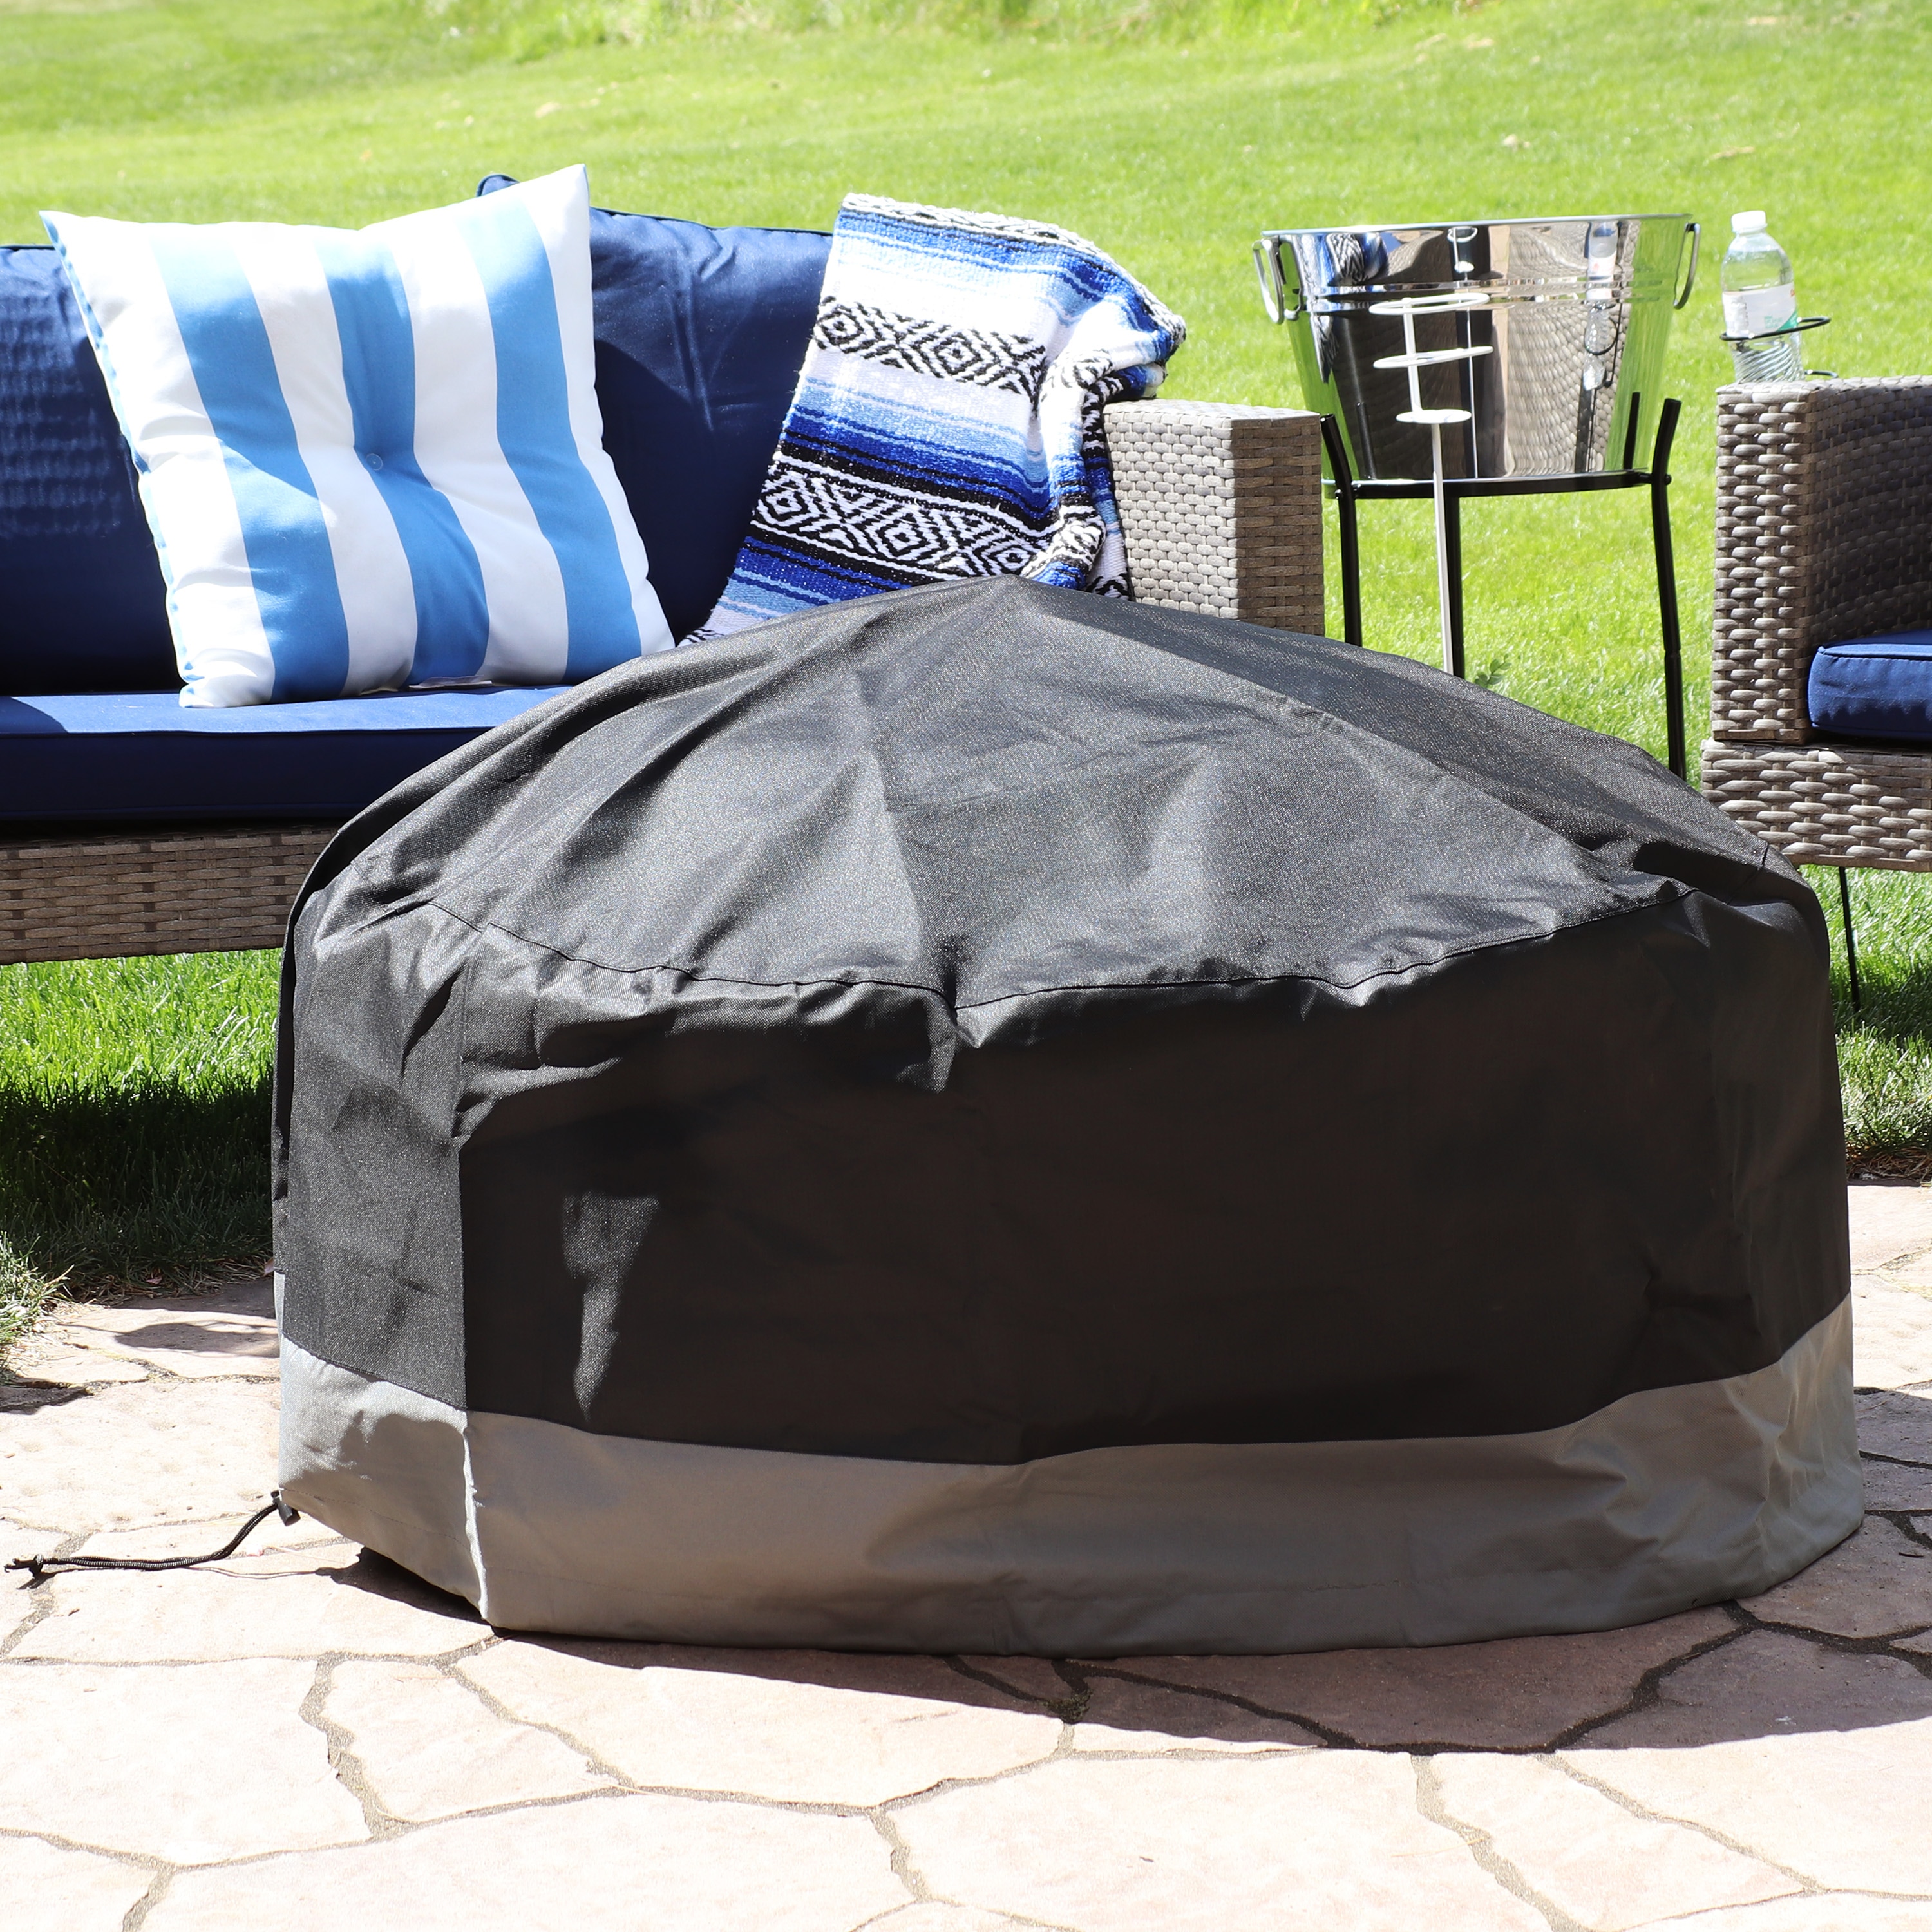 30'' Patio Round Fire Pit Cover Waterproof UV Protector Grill BBQ Cover 